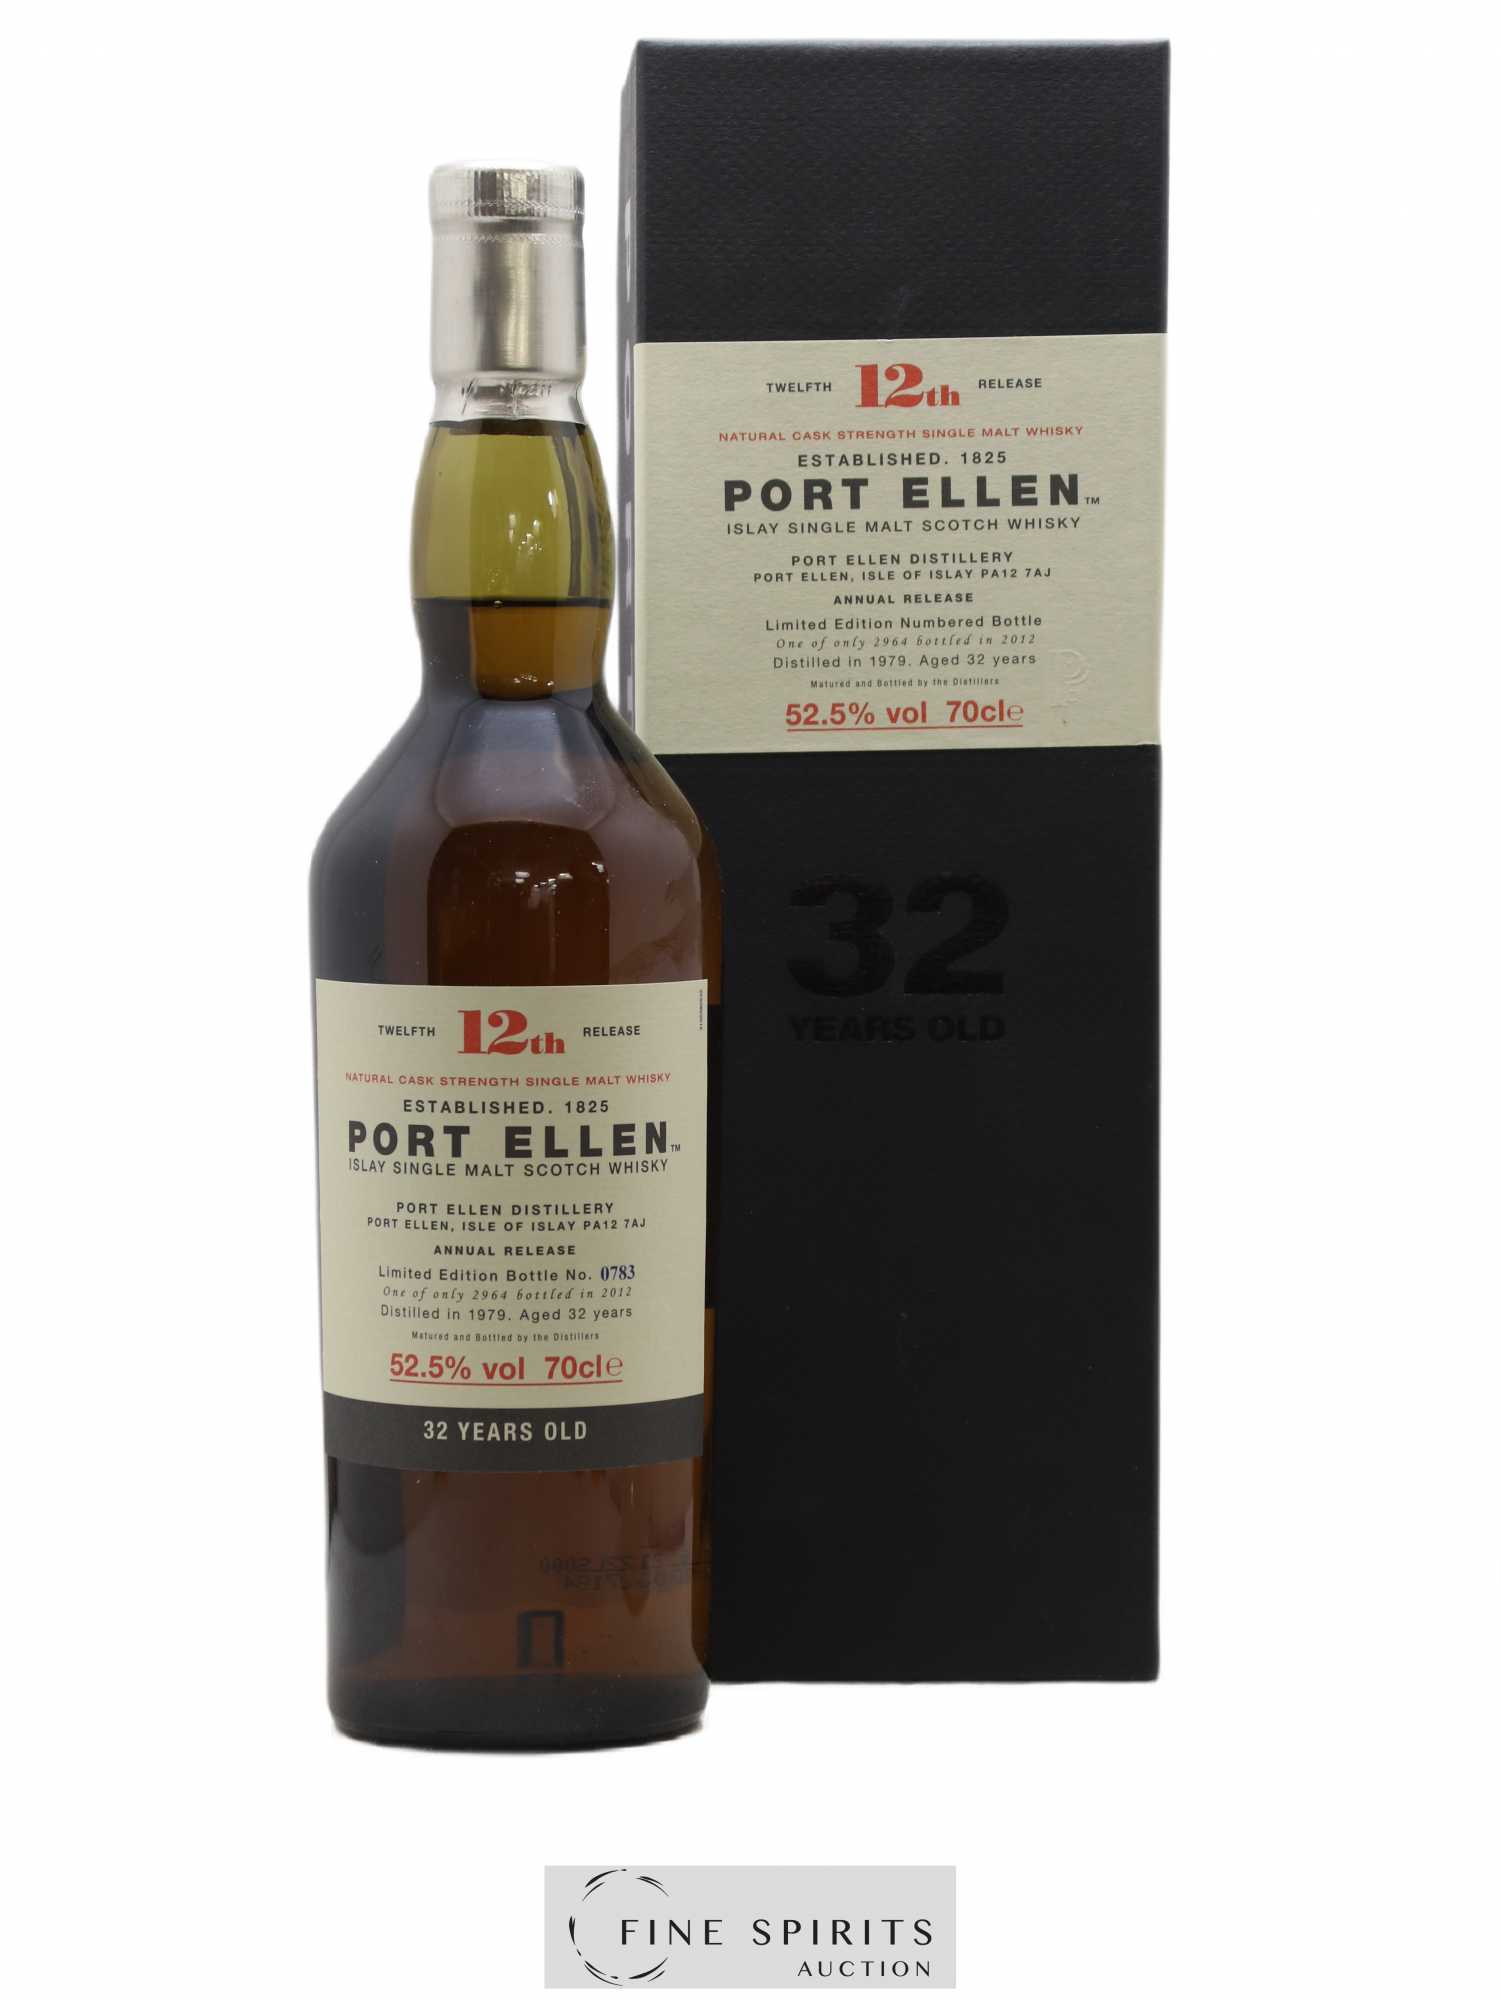 Port Ellen 32 years 1979 Of. 12th Release Natural Cask Strength - One of 2964 - bottled 2012 Limited Edition 